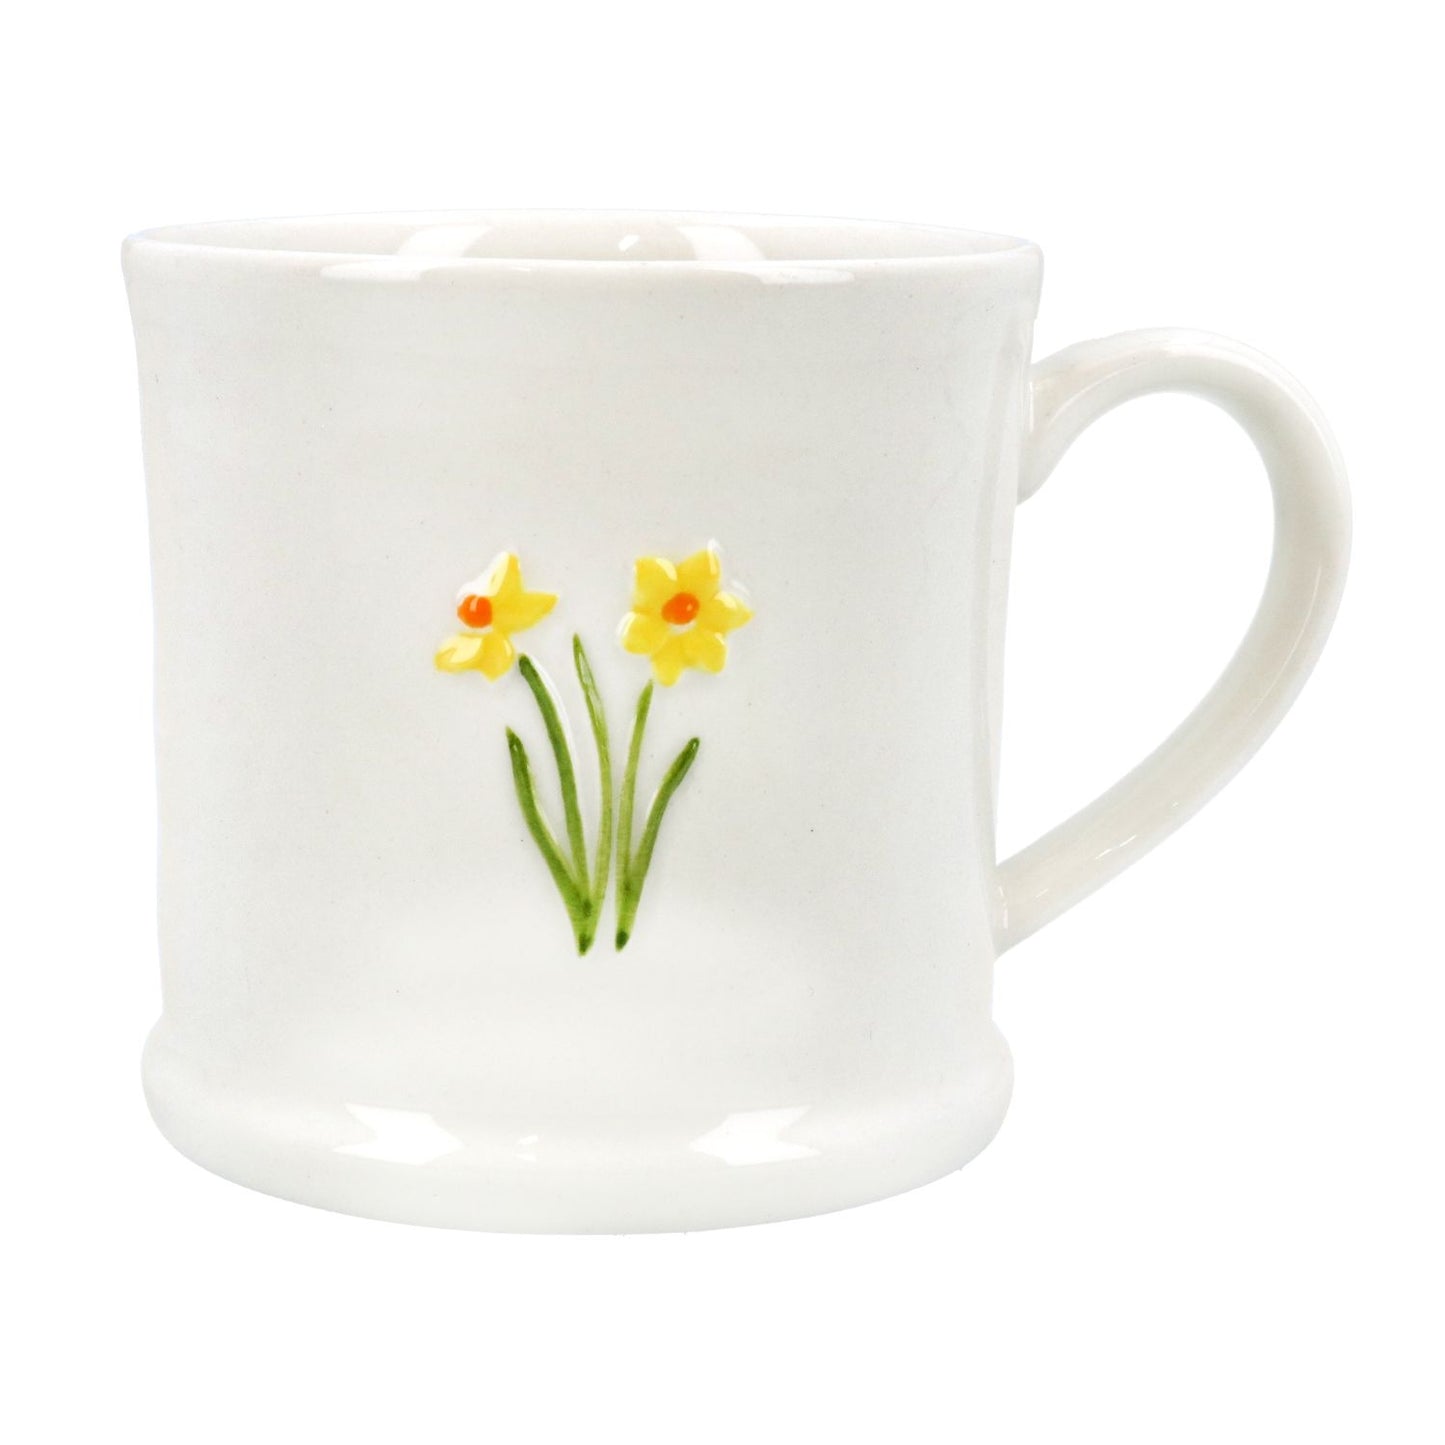 white bone china mug with a motif featuring 2 yellow daffodils with orange centres, green stems ad leaves